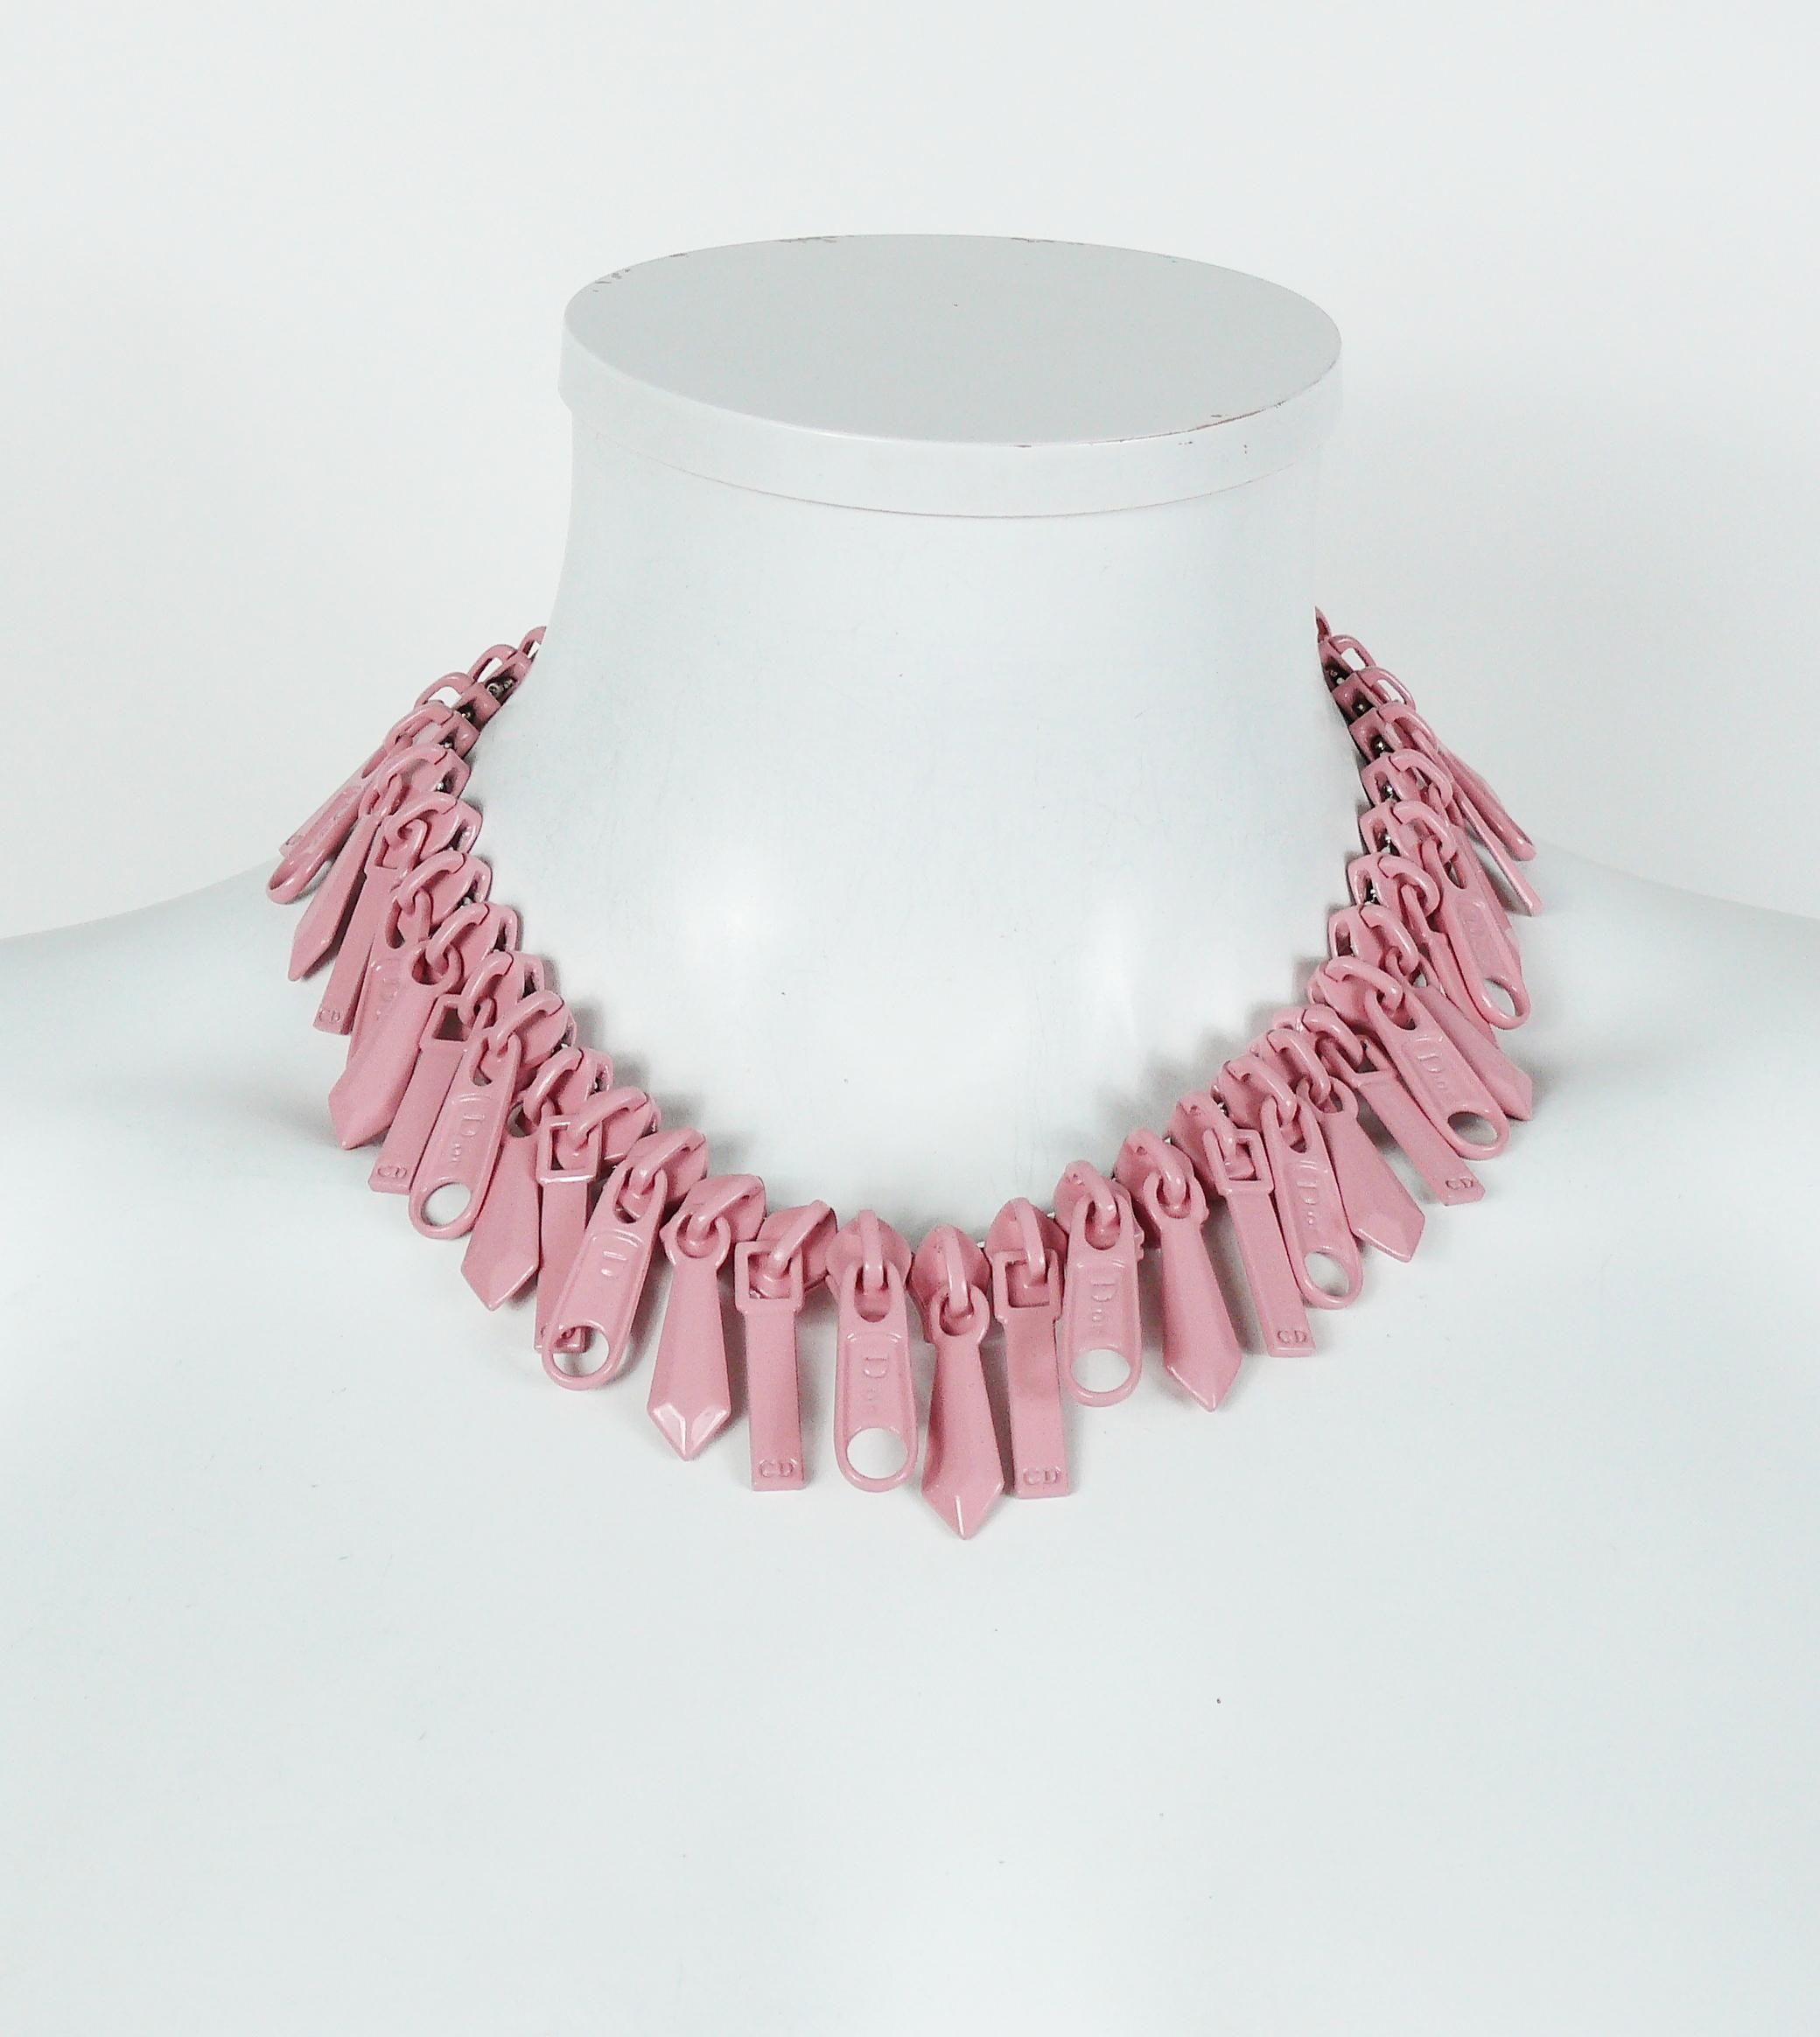 CHRISTIAN DIOR rare silver toned necklace featuring numerous pink enamel zipper cursors, some embossed DIOR, others CD.

Lobster clasp closure.
Adjustable length.

Embossed DIOR on the clasp/

Indicative measurements : adjustable length from approx.